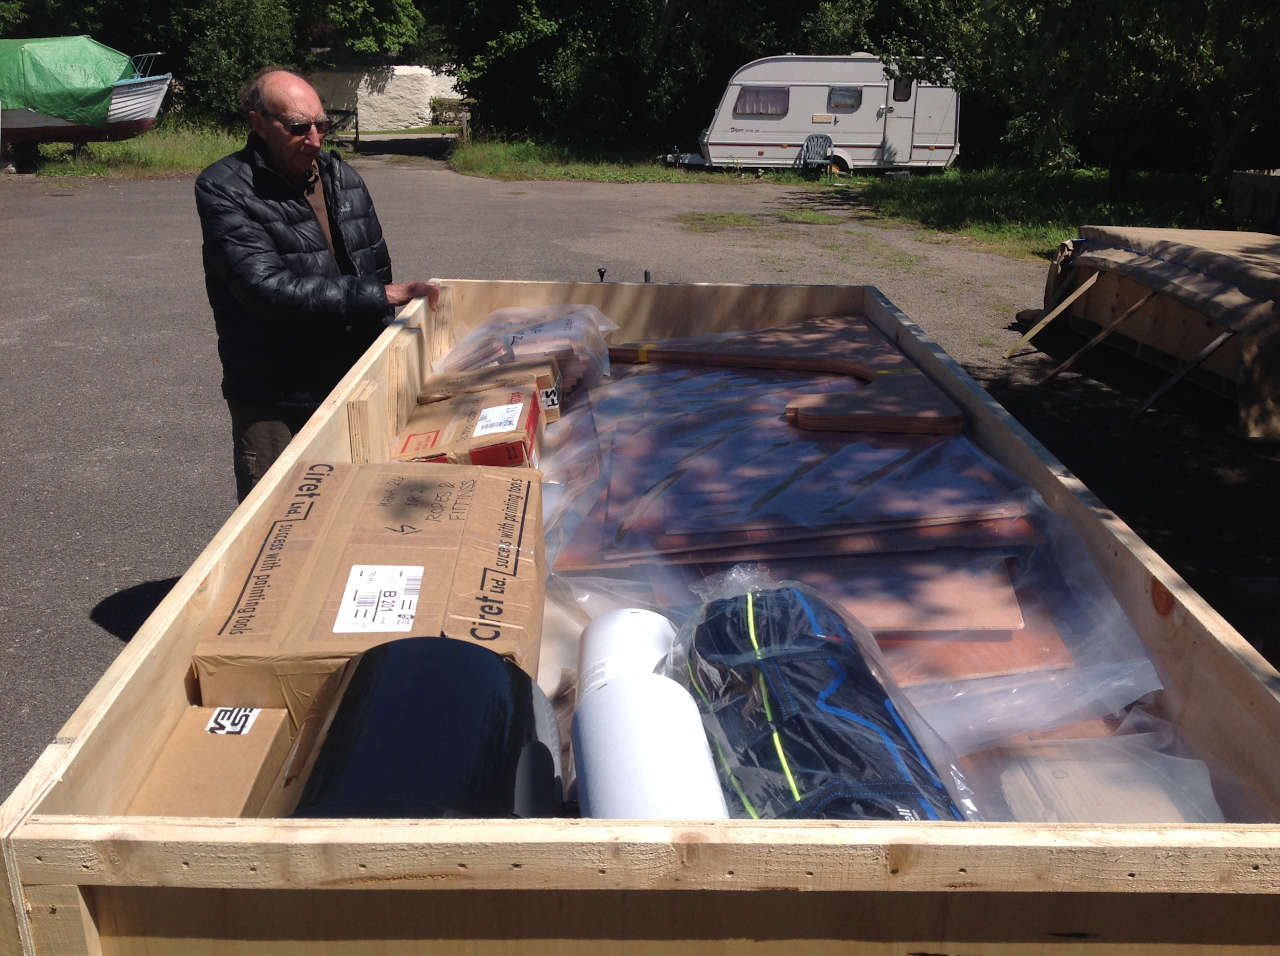 A big box full of plywoood parts and other boat components